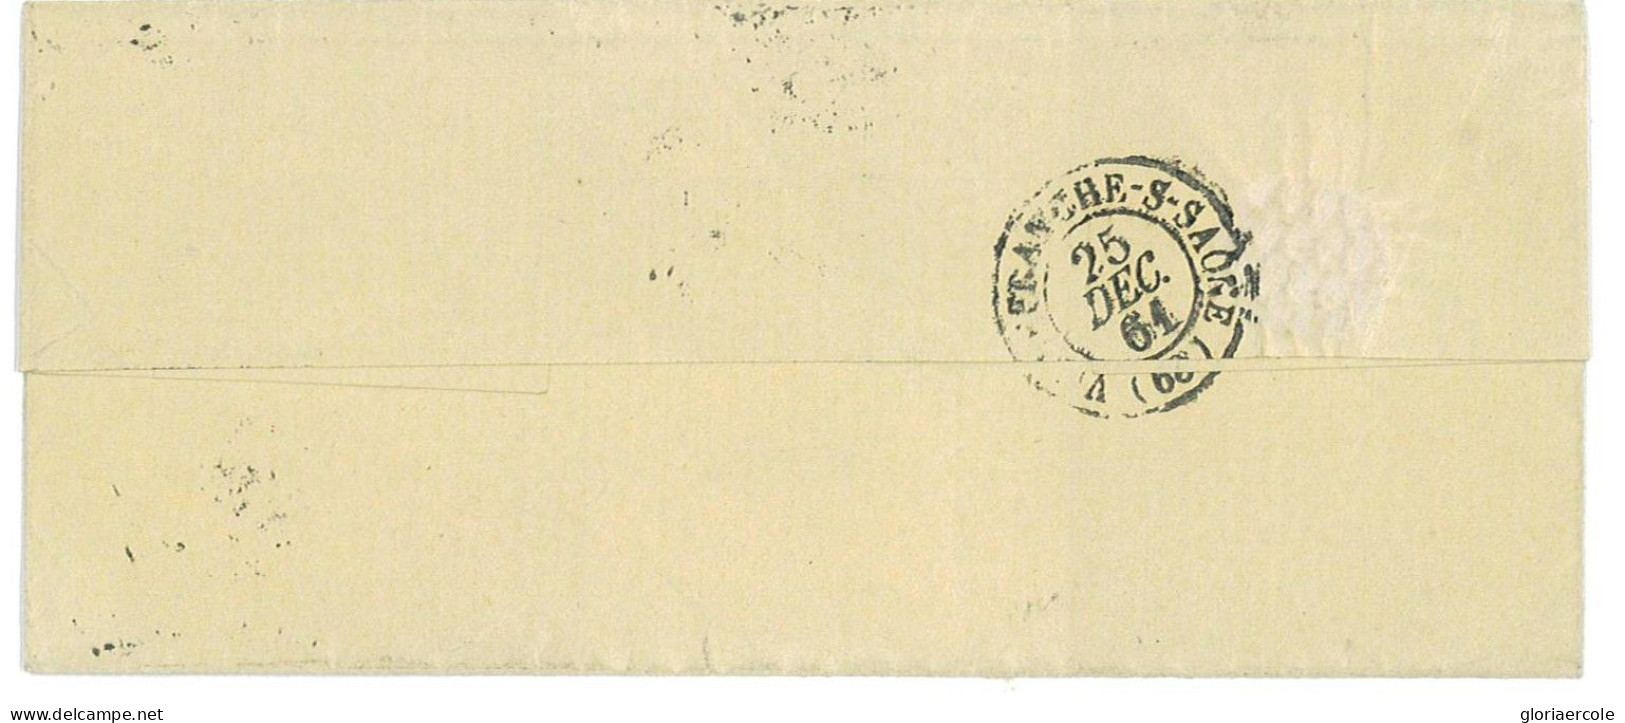 P2865 - FRANCE YVERT 12 A VERT JAUNE, 2 STAMPS ON FOLDED LETTER, LOCAL USE 1861 VILLEFRANCHE - 1853-1860 Napoleone III